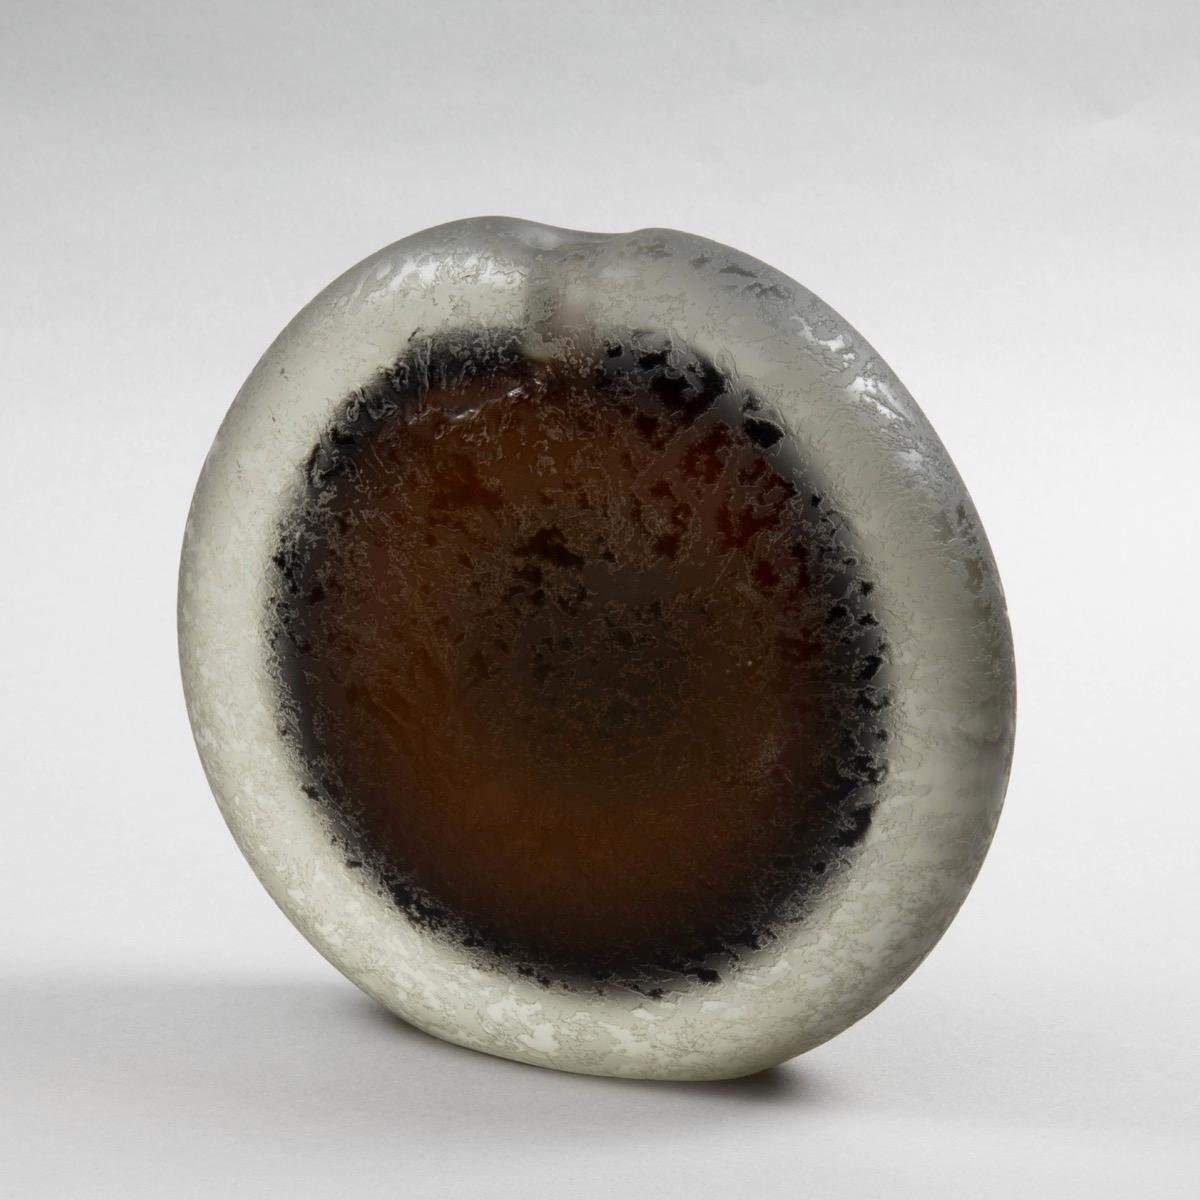 Sculpture vase, mouth glass blown, brown glass incased in thick clear glass, hole pierced to top, entire body corroded by acid bath.

About Alfredo Barbini:

Alfredo, a Murano glass artist was born in 1912 on the island of Murano.
He is